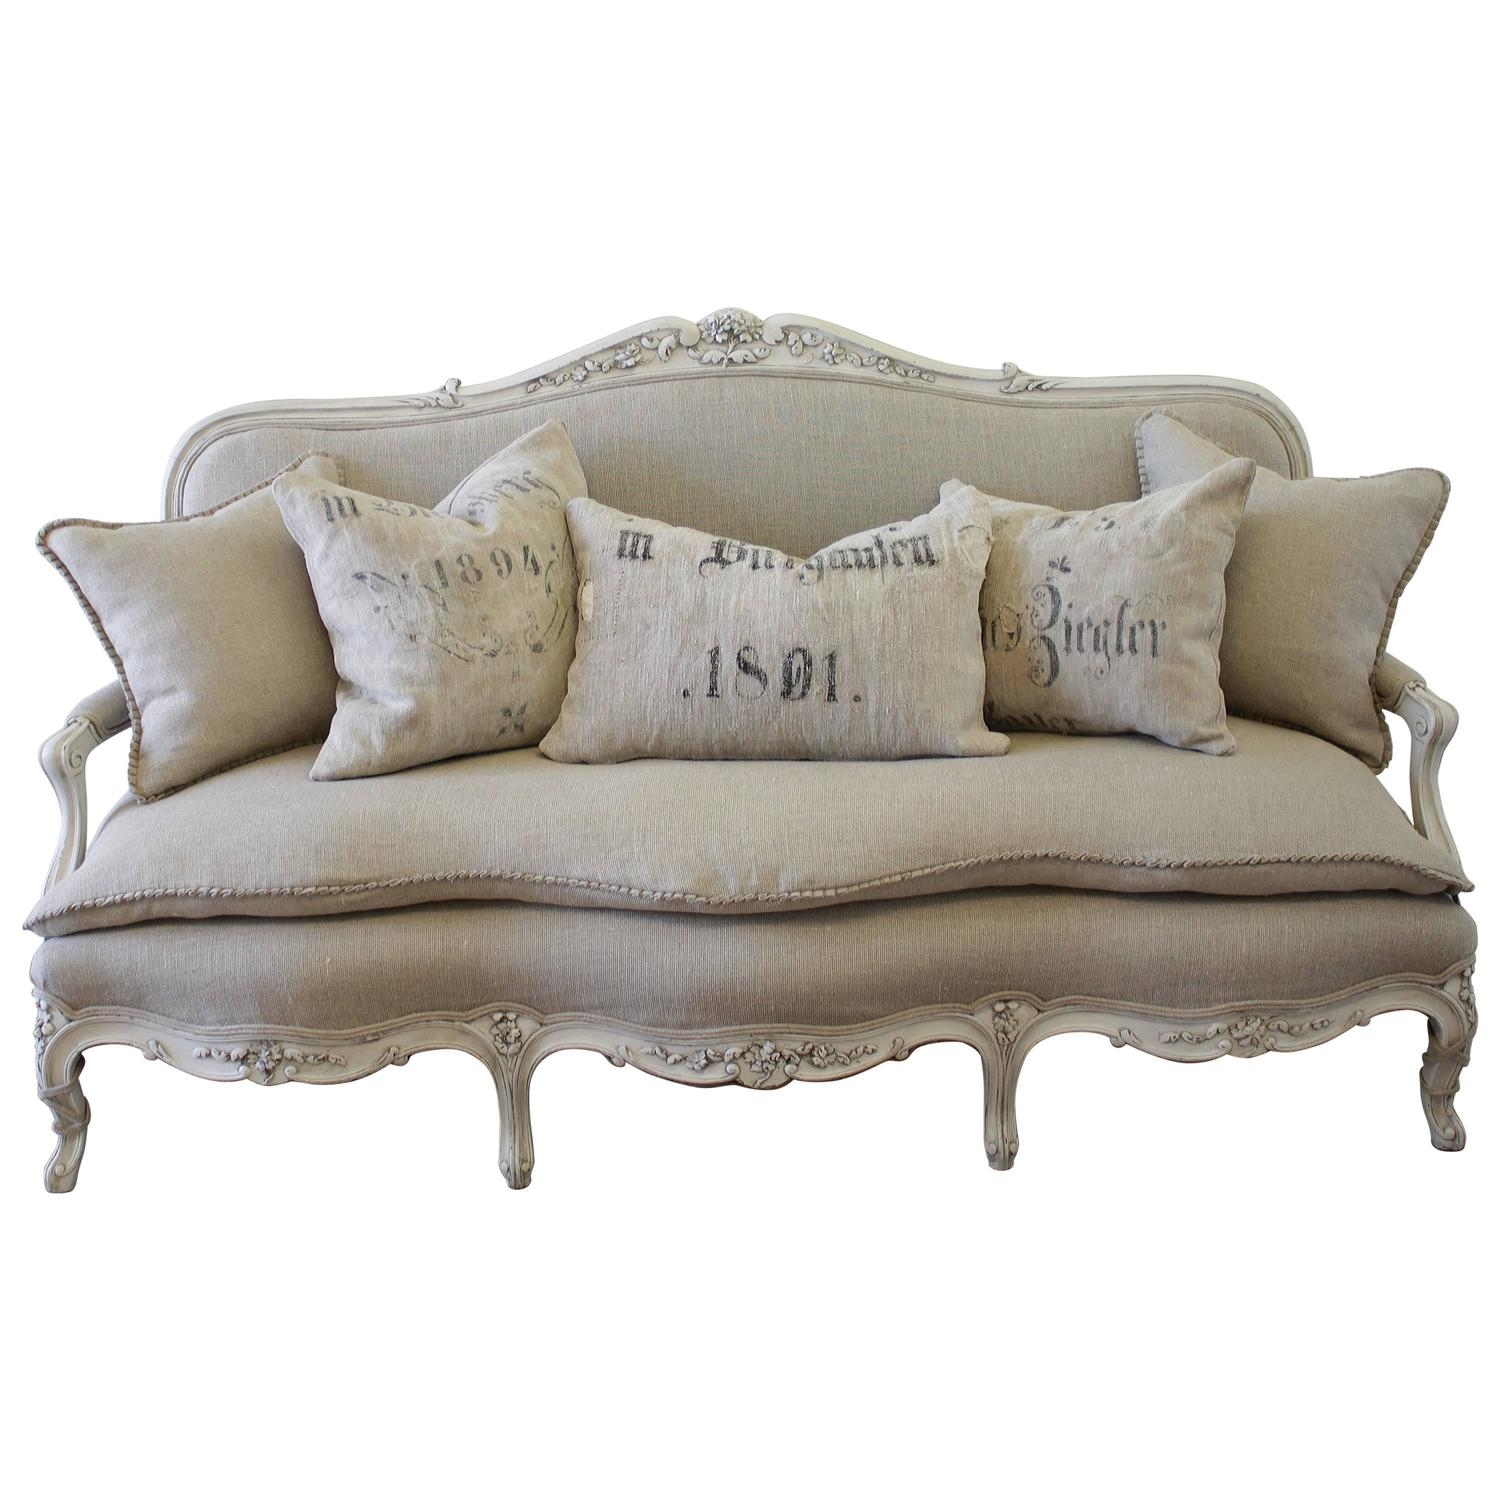 French Country Sofa You Ll Love In 2021 Visualhunt